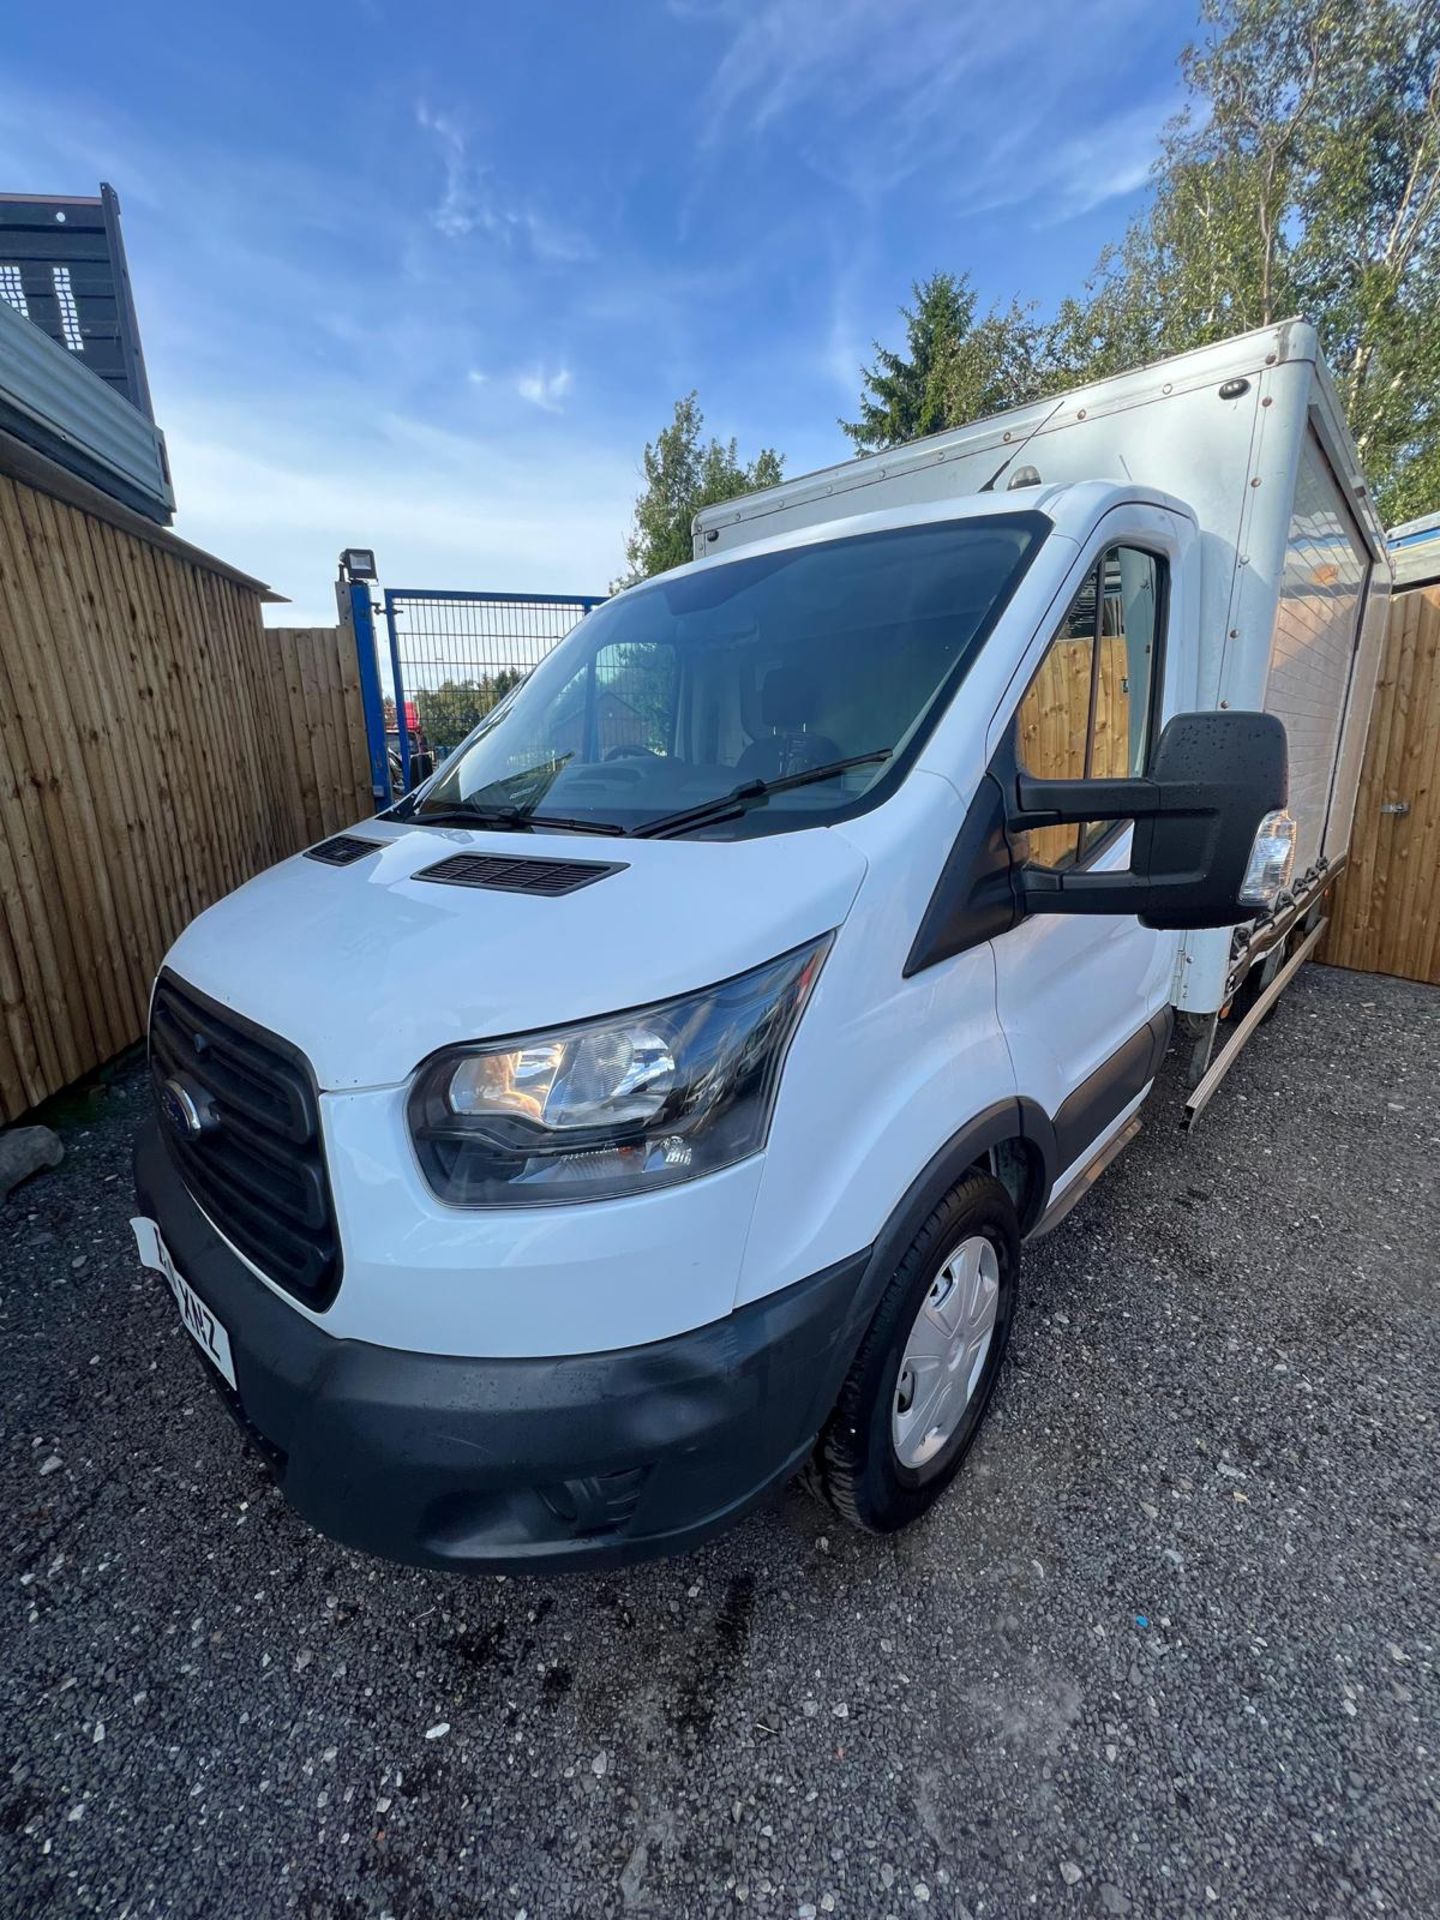 FORD TRANSIT BOX VAN 2017 LUTON EURO6 LWB 6 SPEED MANUAL 1COMPANY OWNER FROM NEW - Image 4 of 14